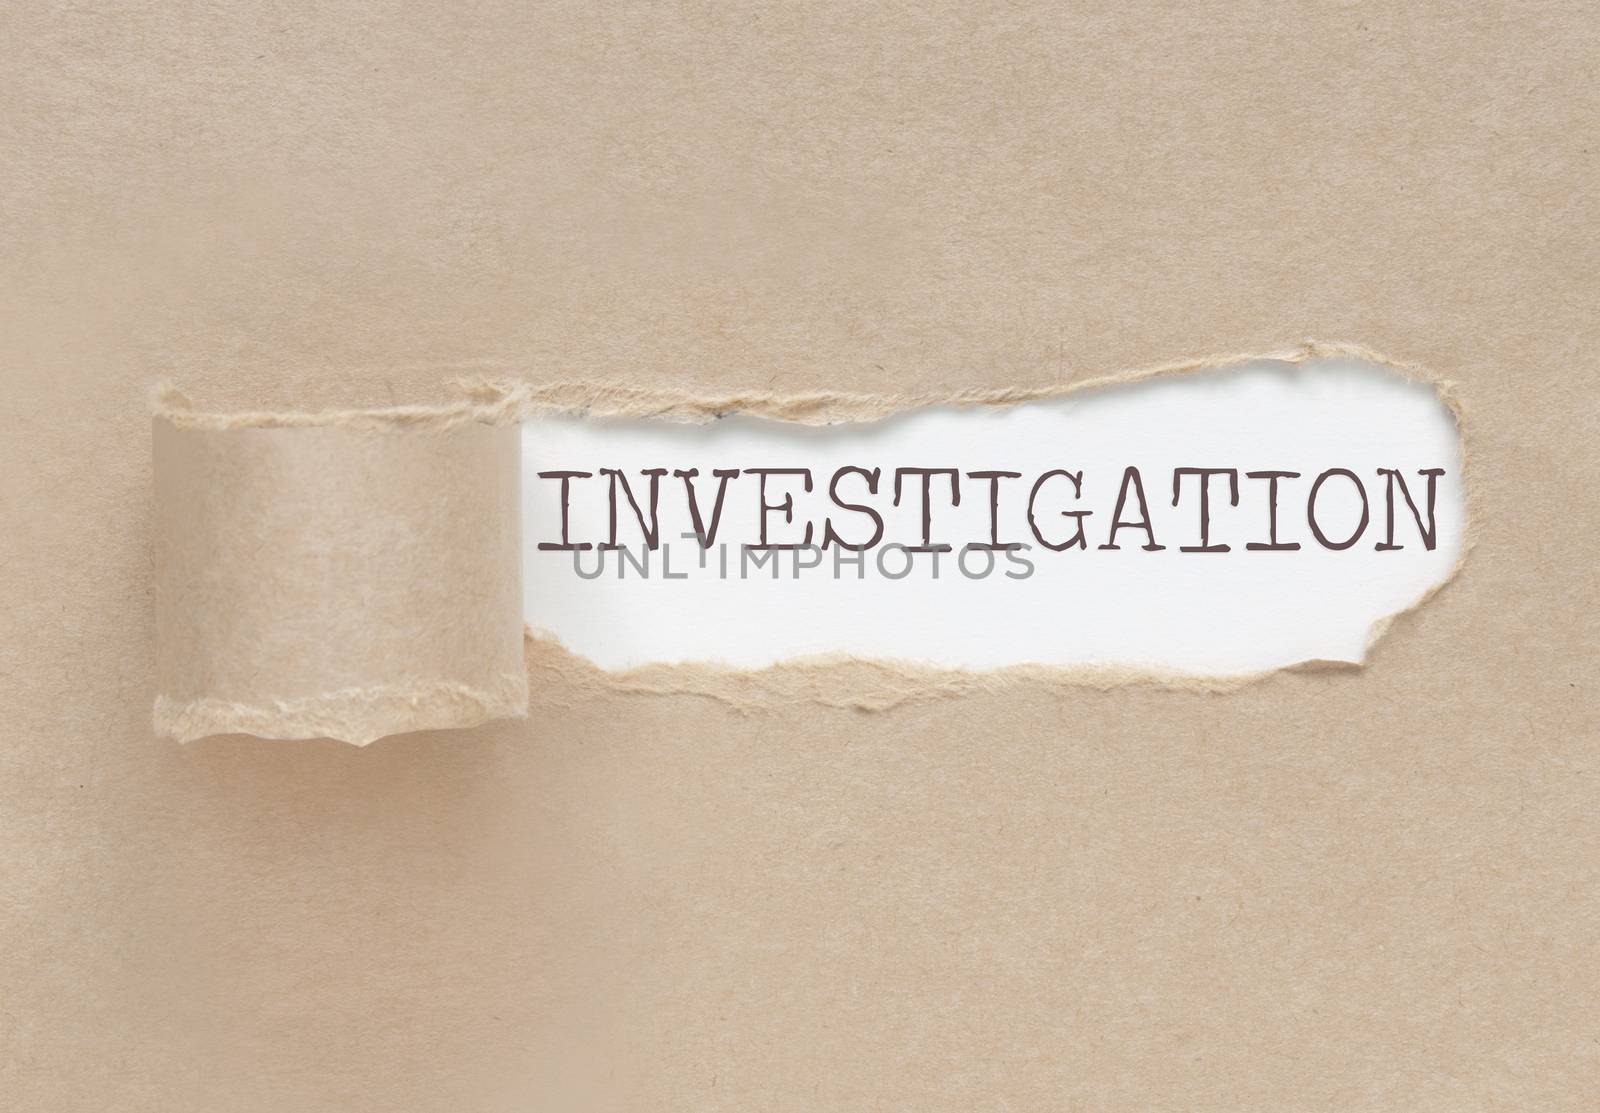 Torn paper revealing the word investigation underneath